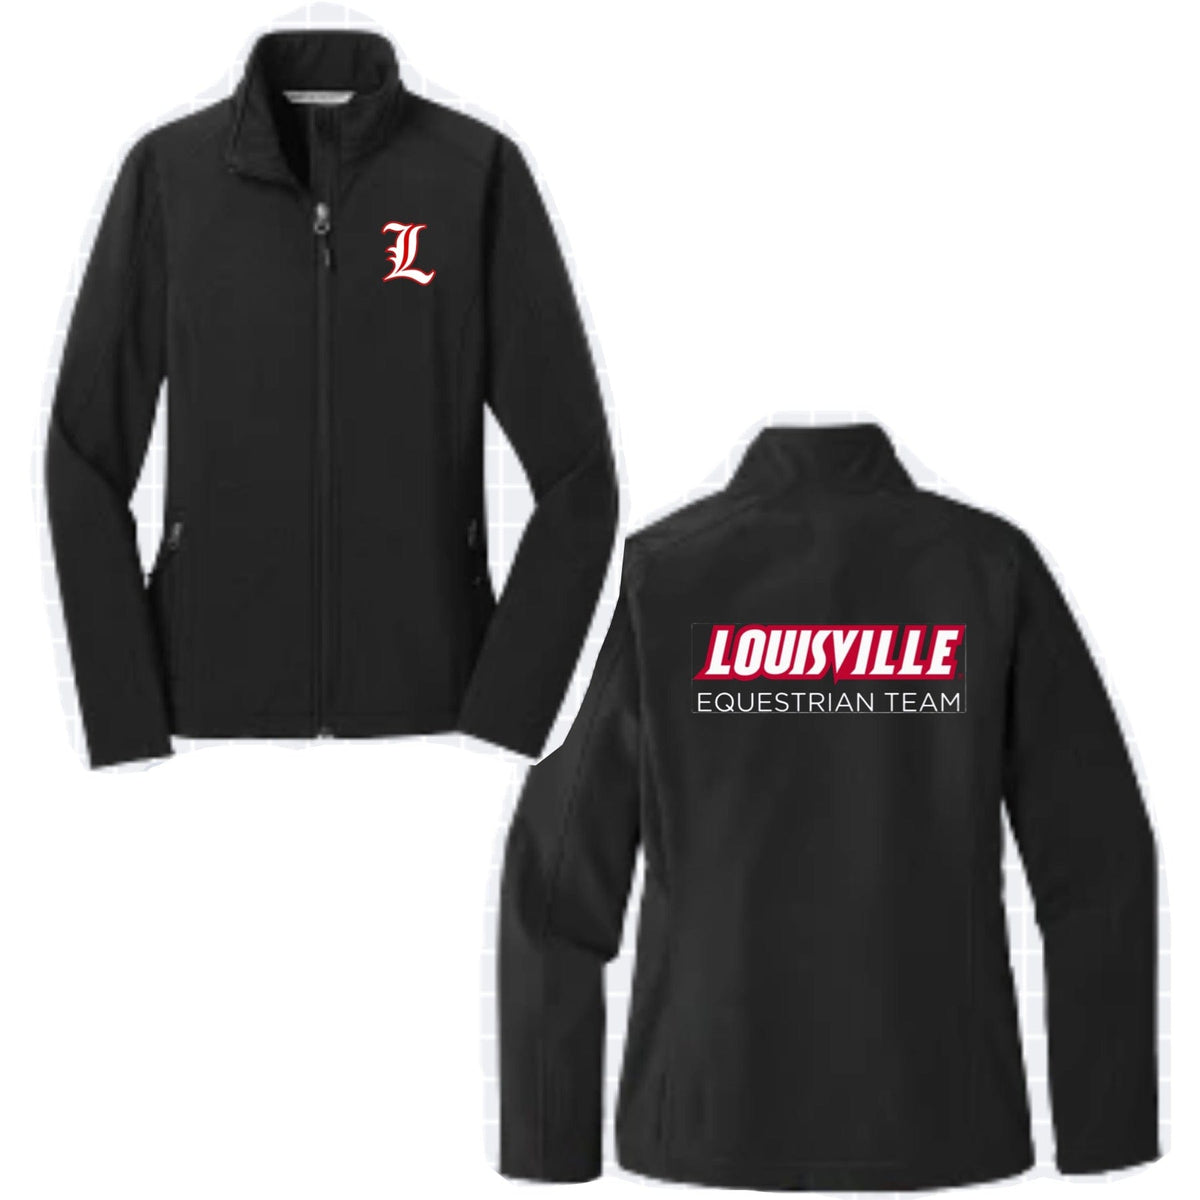 Equestrian Team Apparel Louisville Equestrian Team Hunt Seat Shell Jacket equestrian team apparel online tack store mobile tack store custom farm apparel custom show stable clothing equestrian lifestyle horse show clothing riding clothes horses equestrian tack store